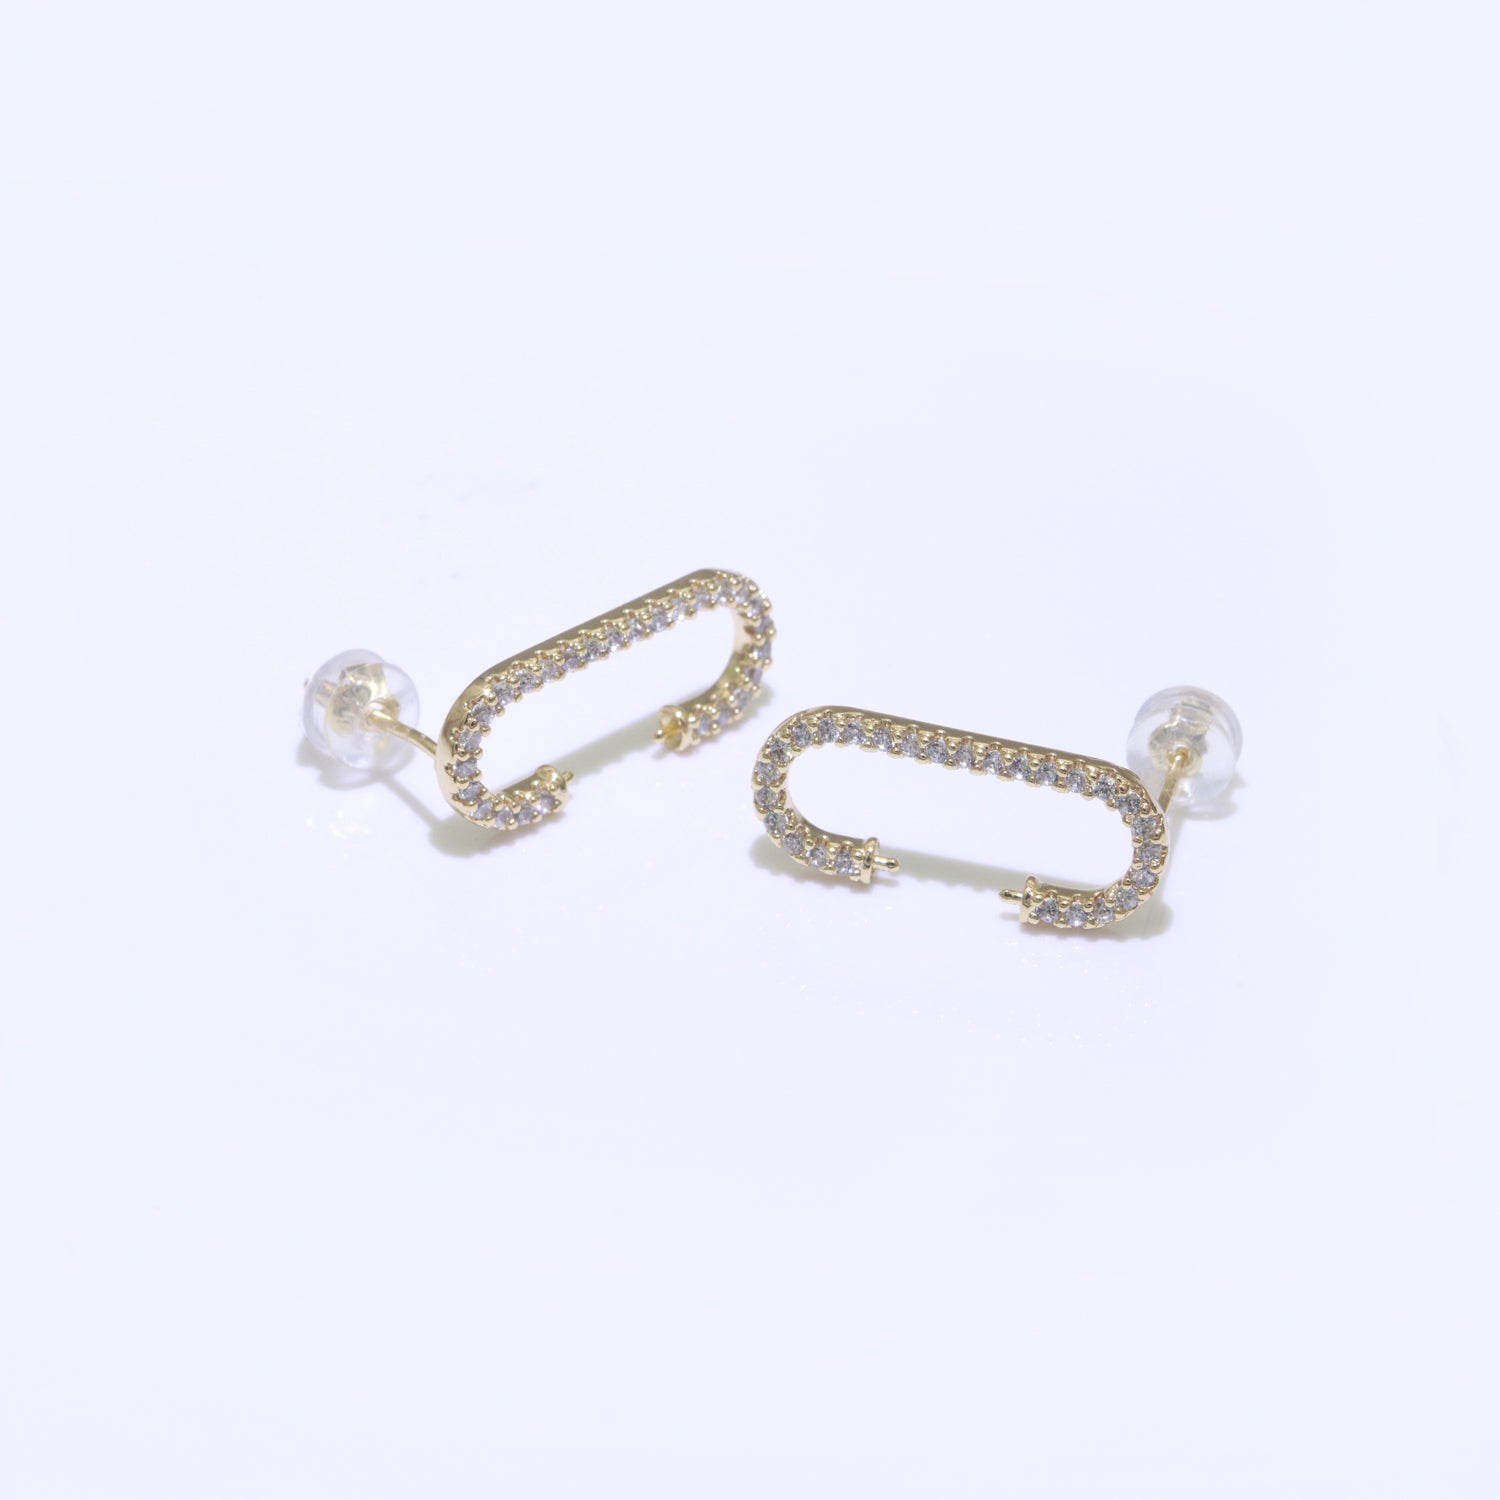 Micro Pave Clear Cz Stud Earring in Gold Filled C shaped Stud Earring - DLUXCA